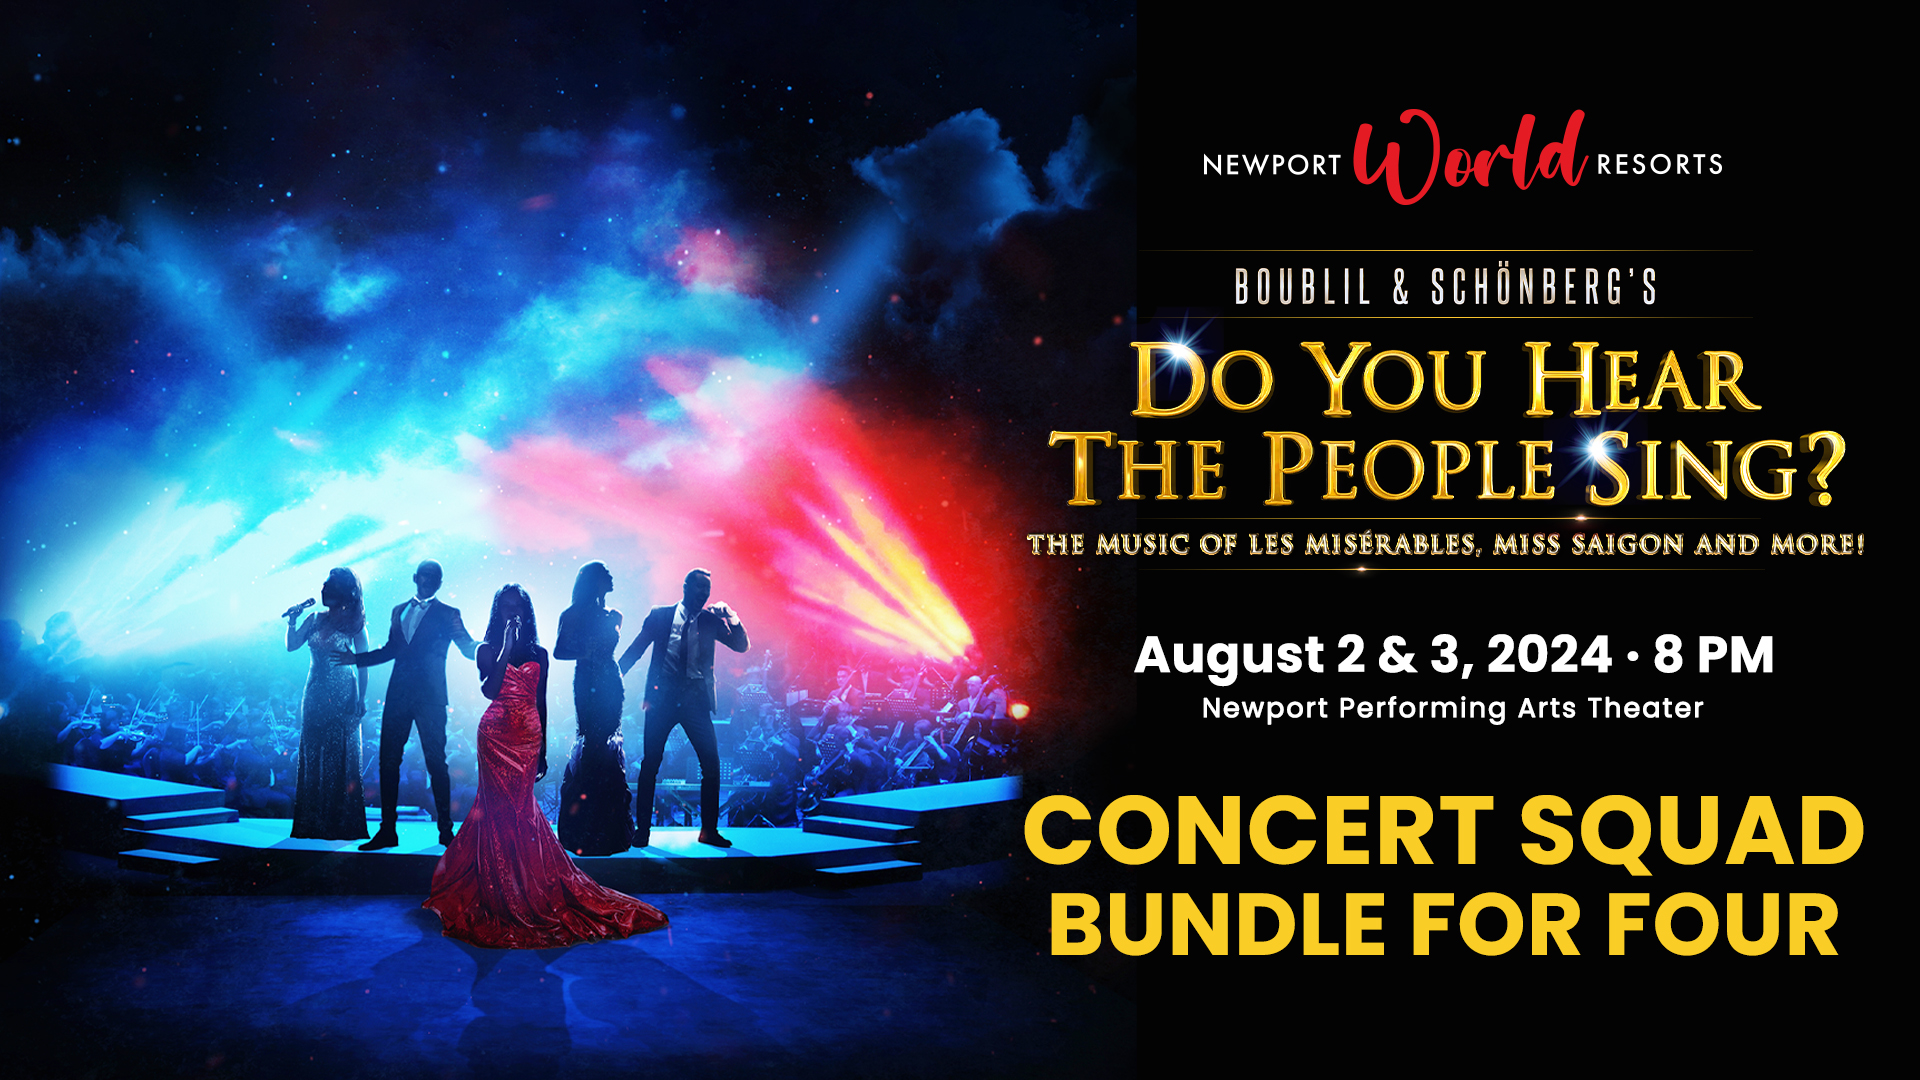 Concert Squad Bundle | DO YOU HEAR THE PEOPLE SING? for Four (4)